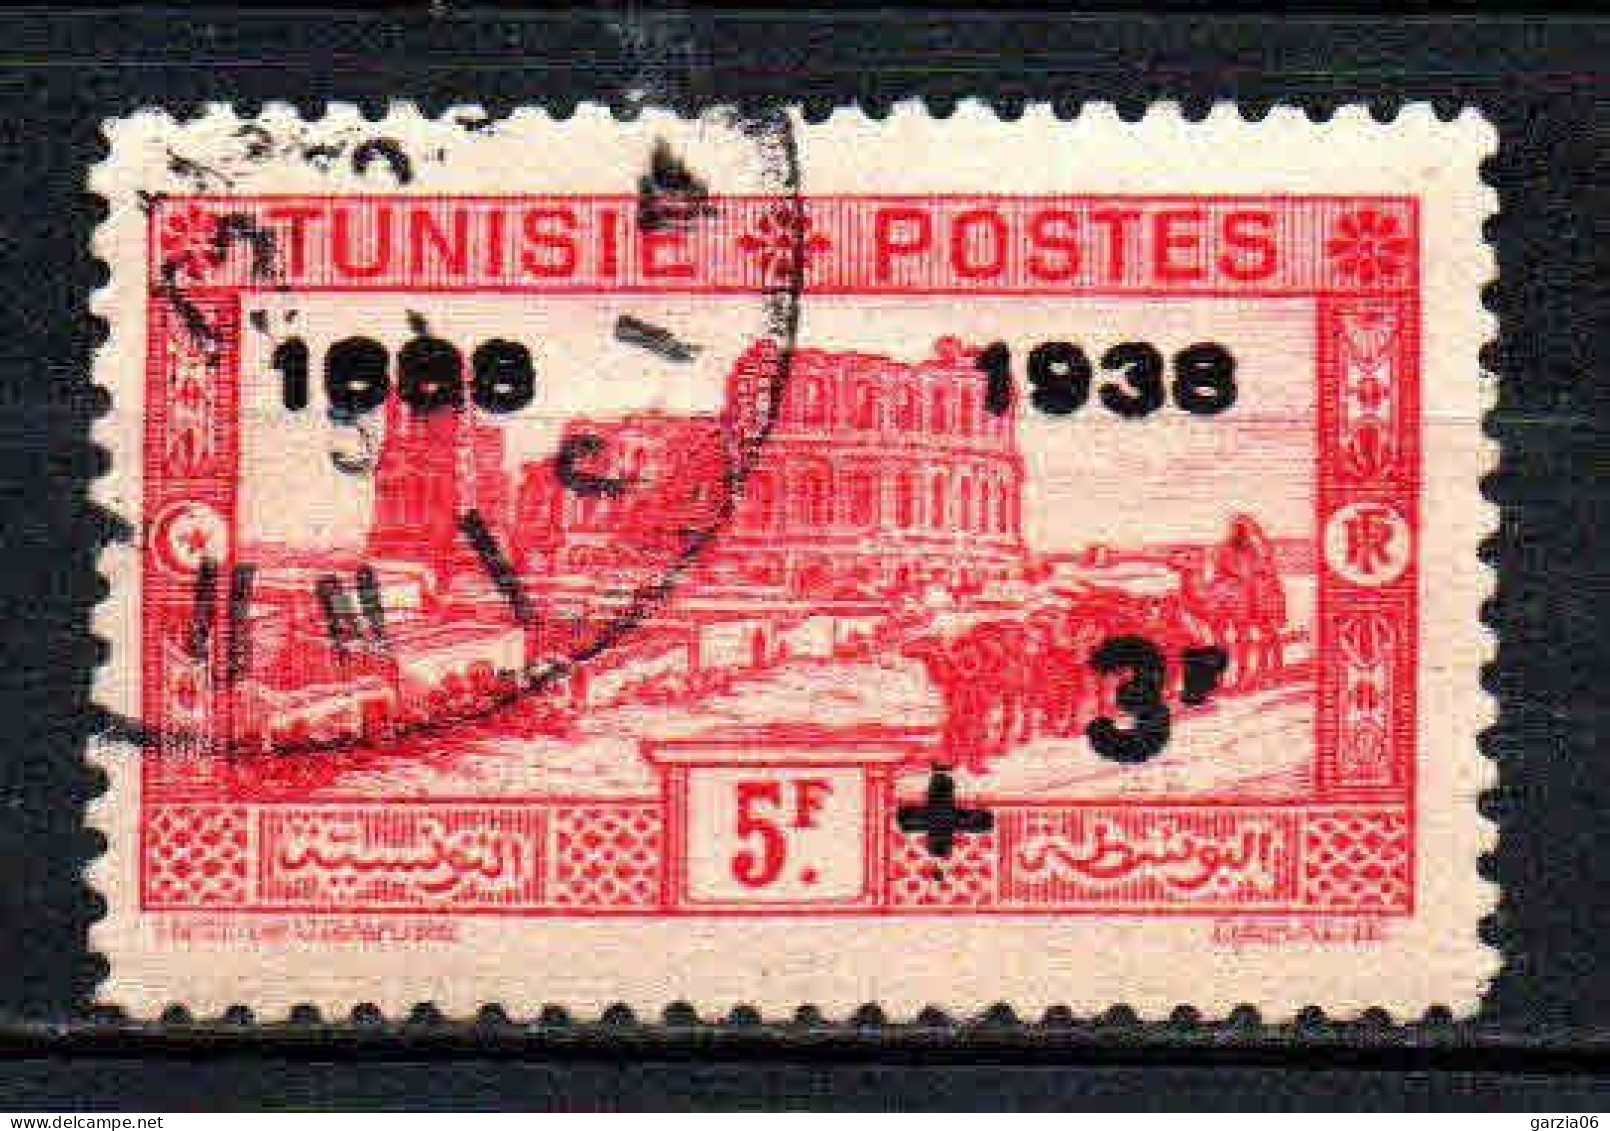 Tunisie  - 1938 - Type Antérieurs Surch  - N° 202  - Oblit - Used - Used Stamps